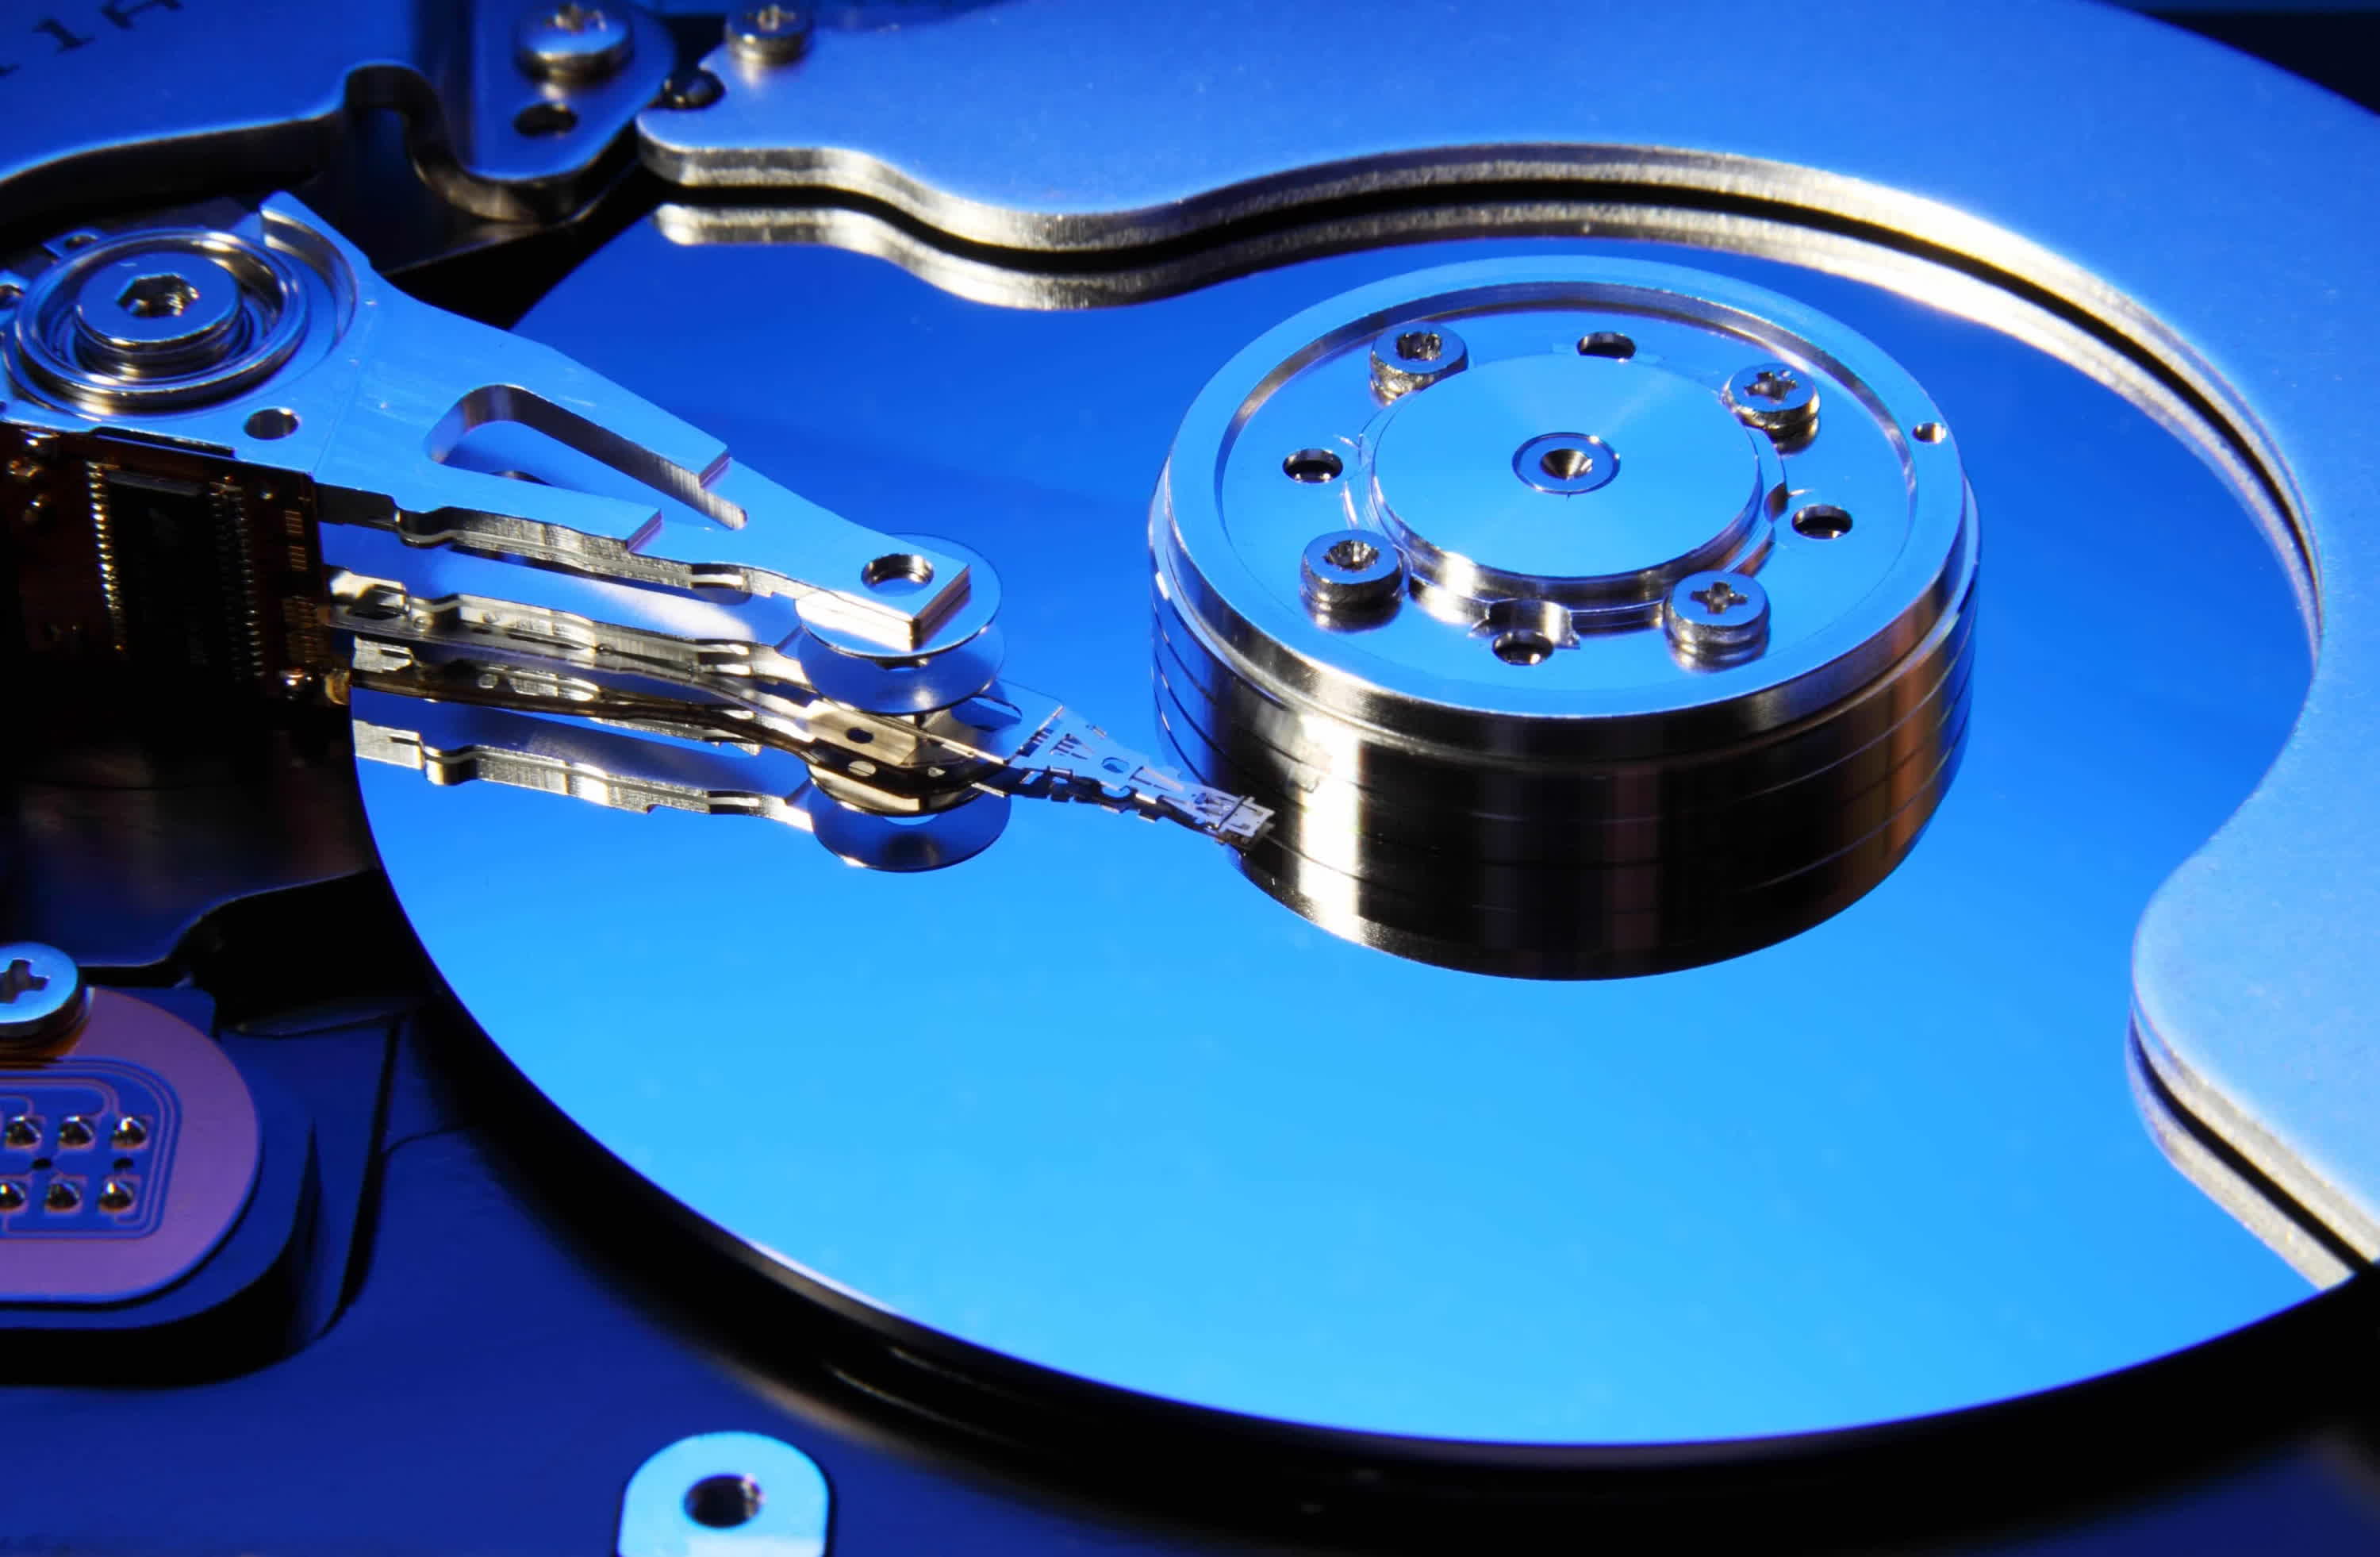 Hard drives are expected to reach a penny per gigabyte by mid-2025